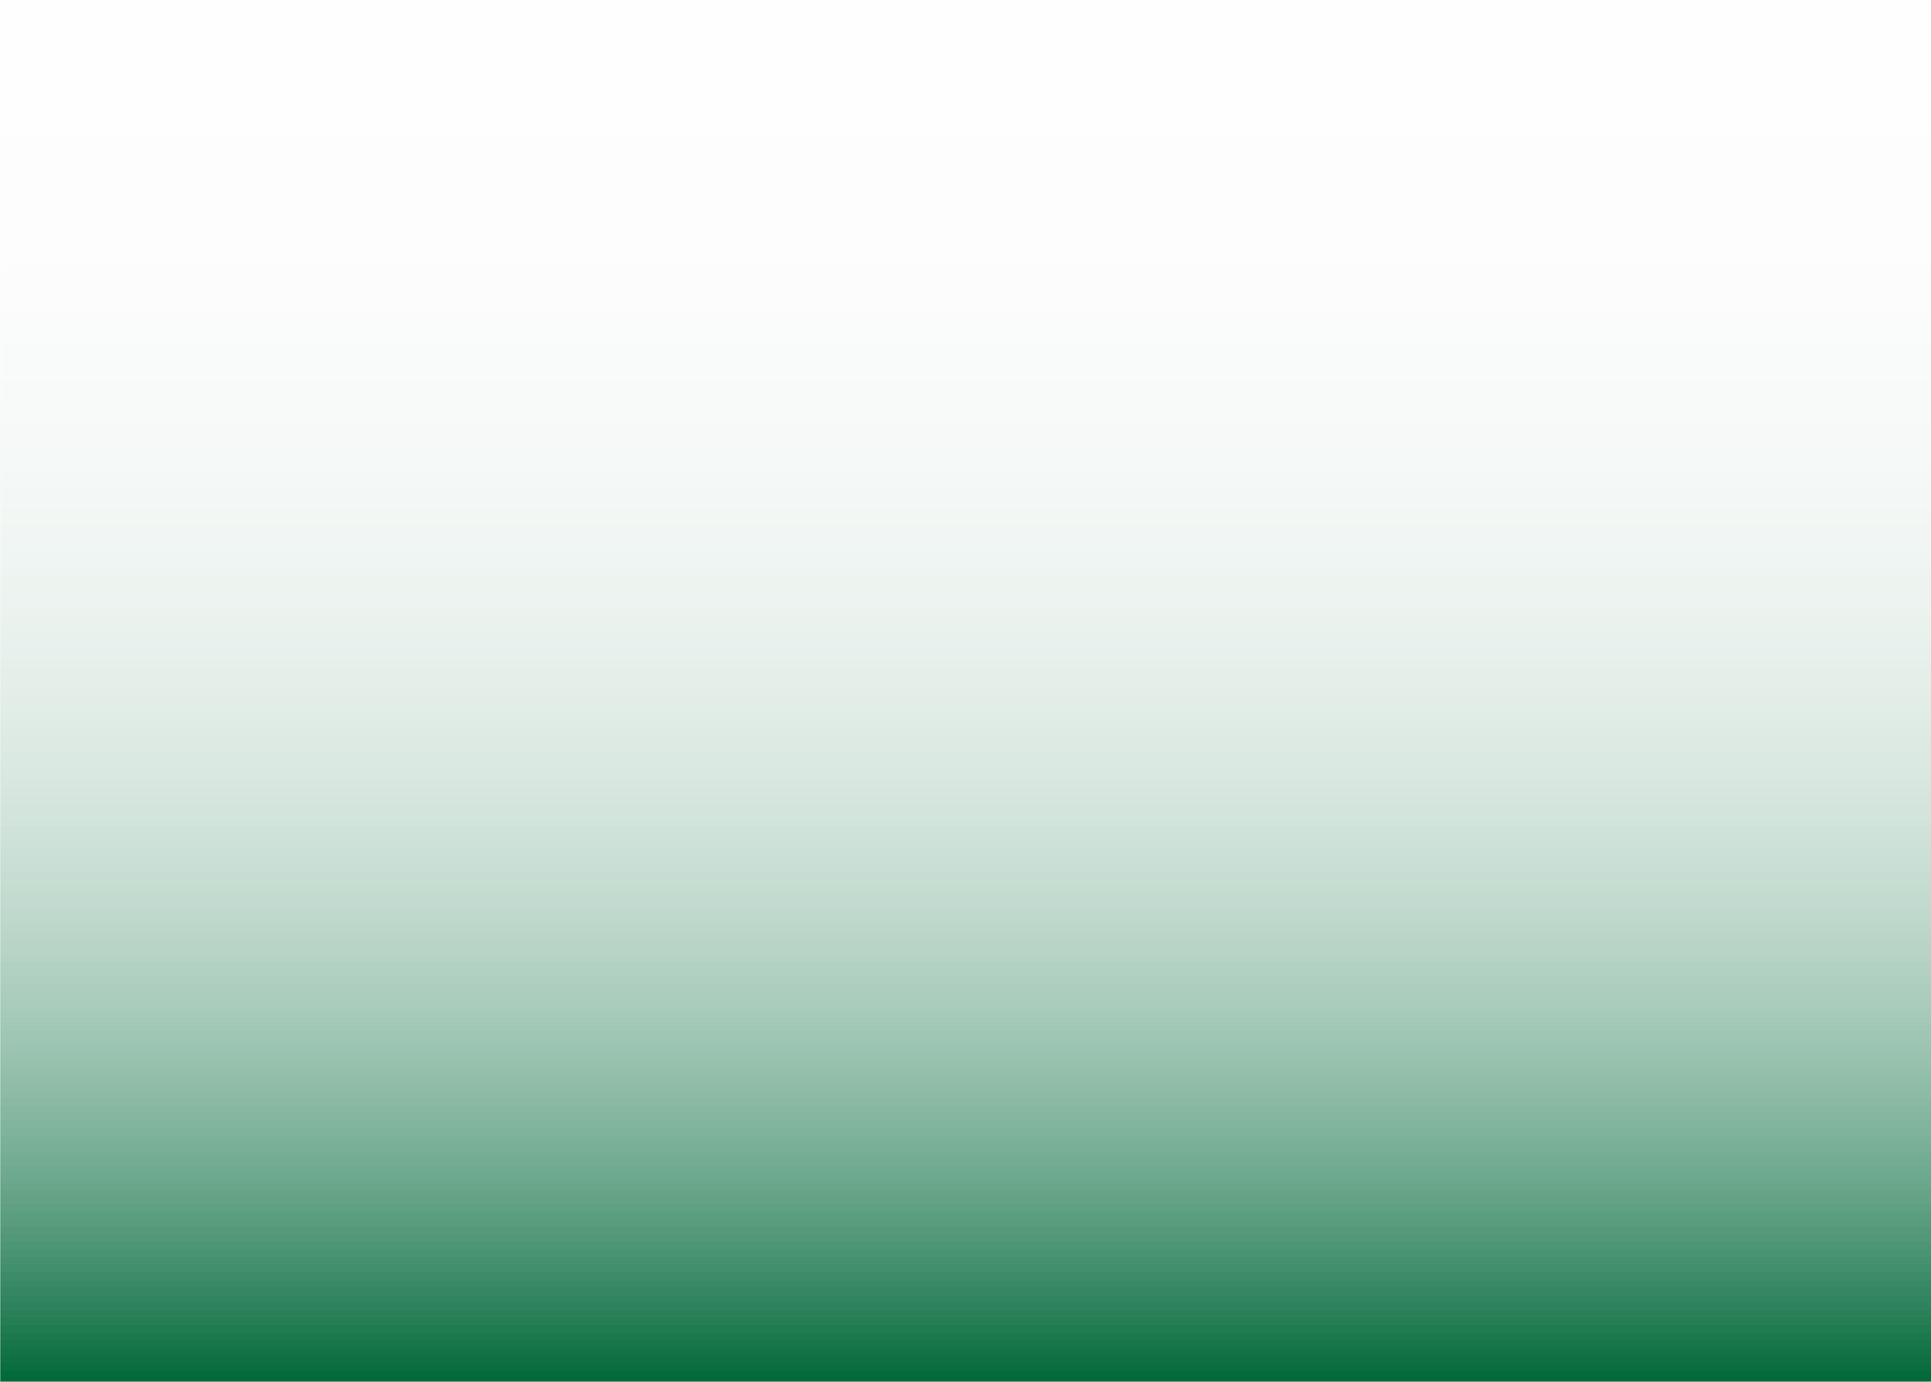 Green Gradient That Fades To Transparency